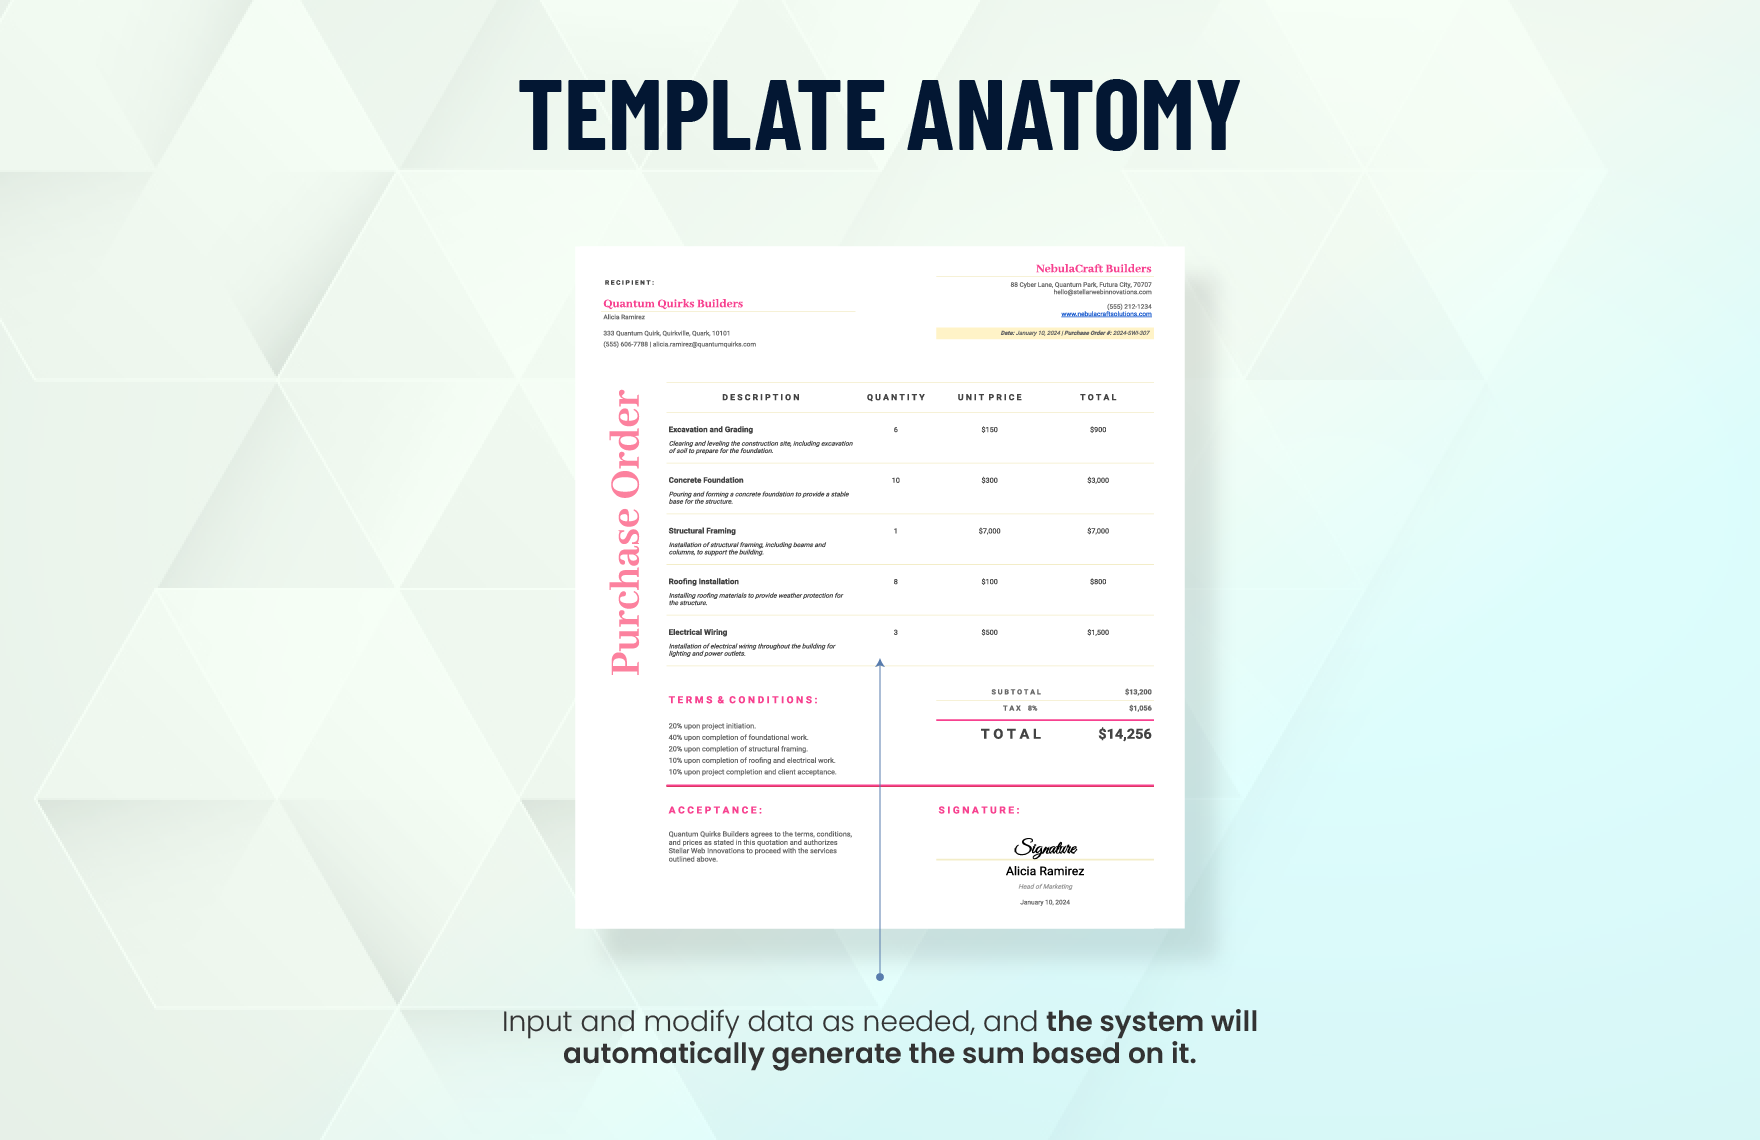 Proforma Purchase Order Template